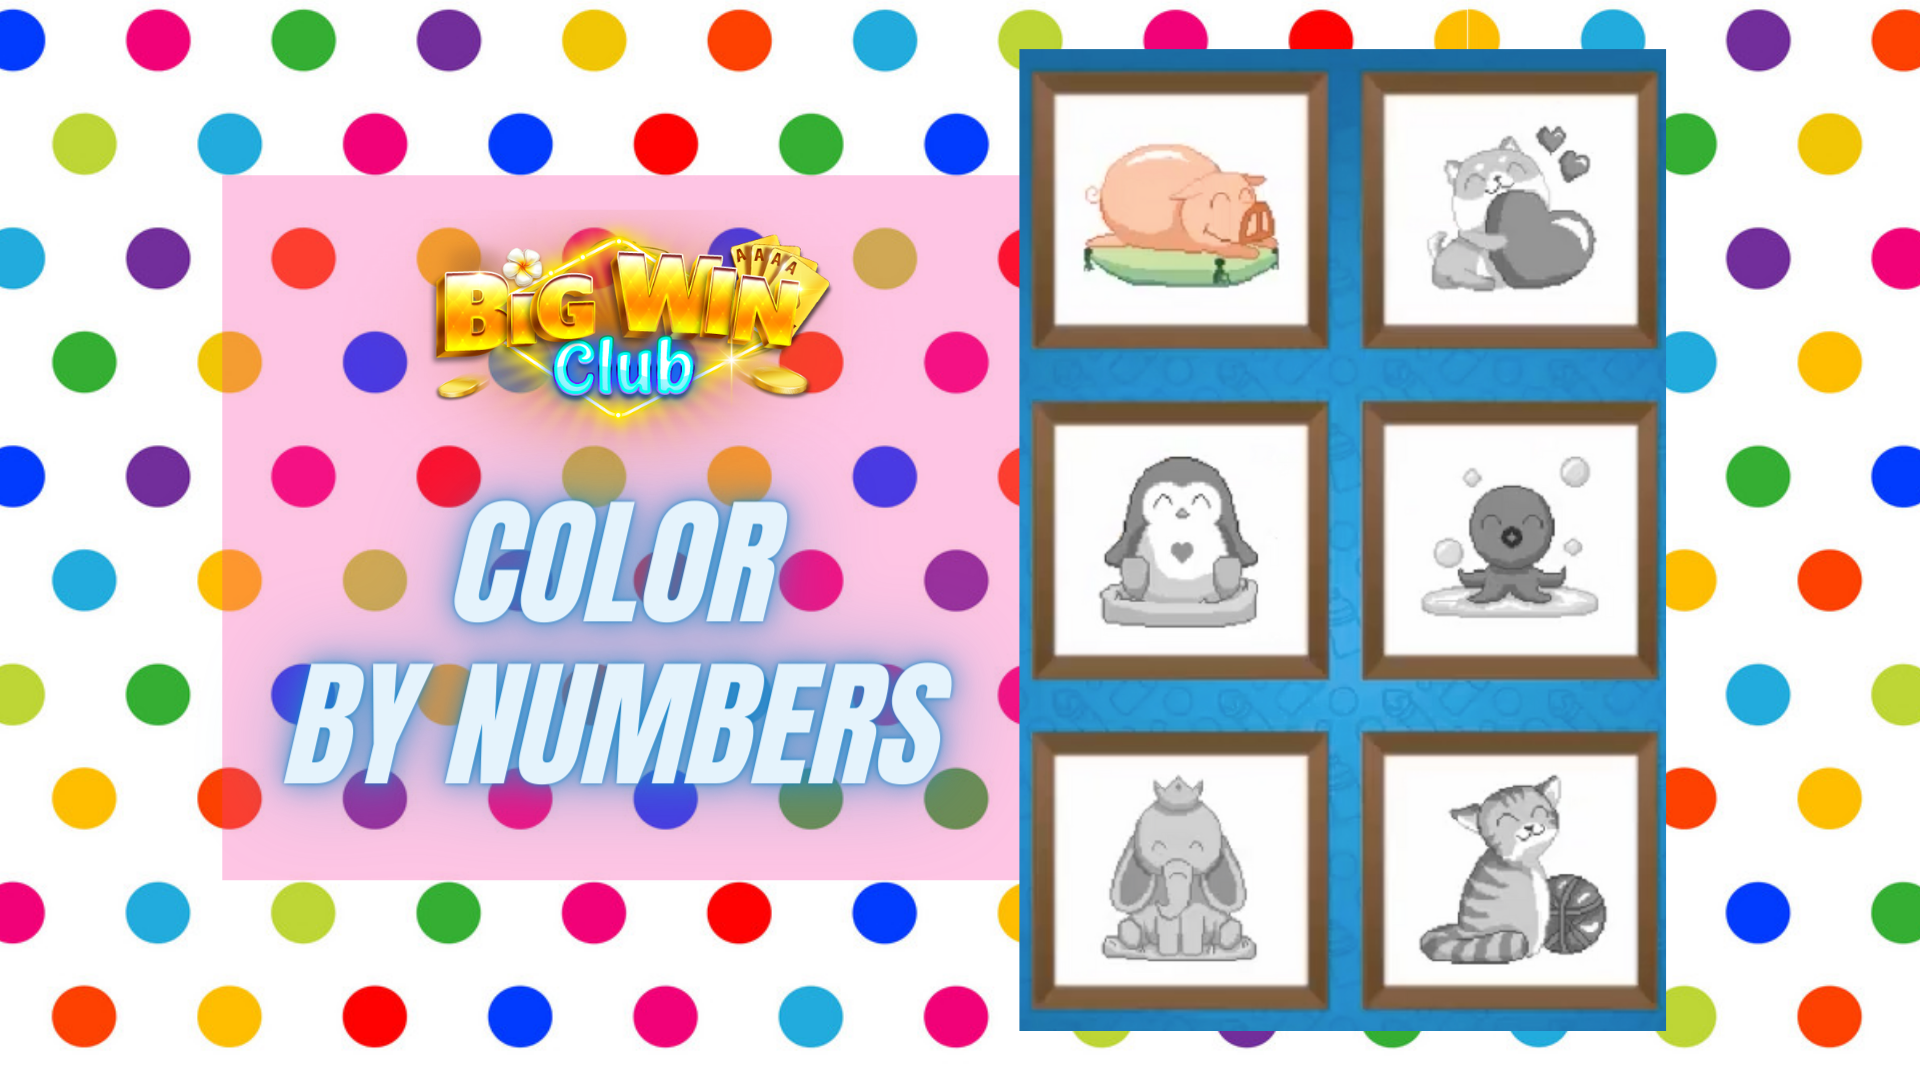 Ang Color by Number Games